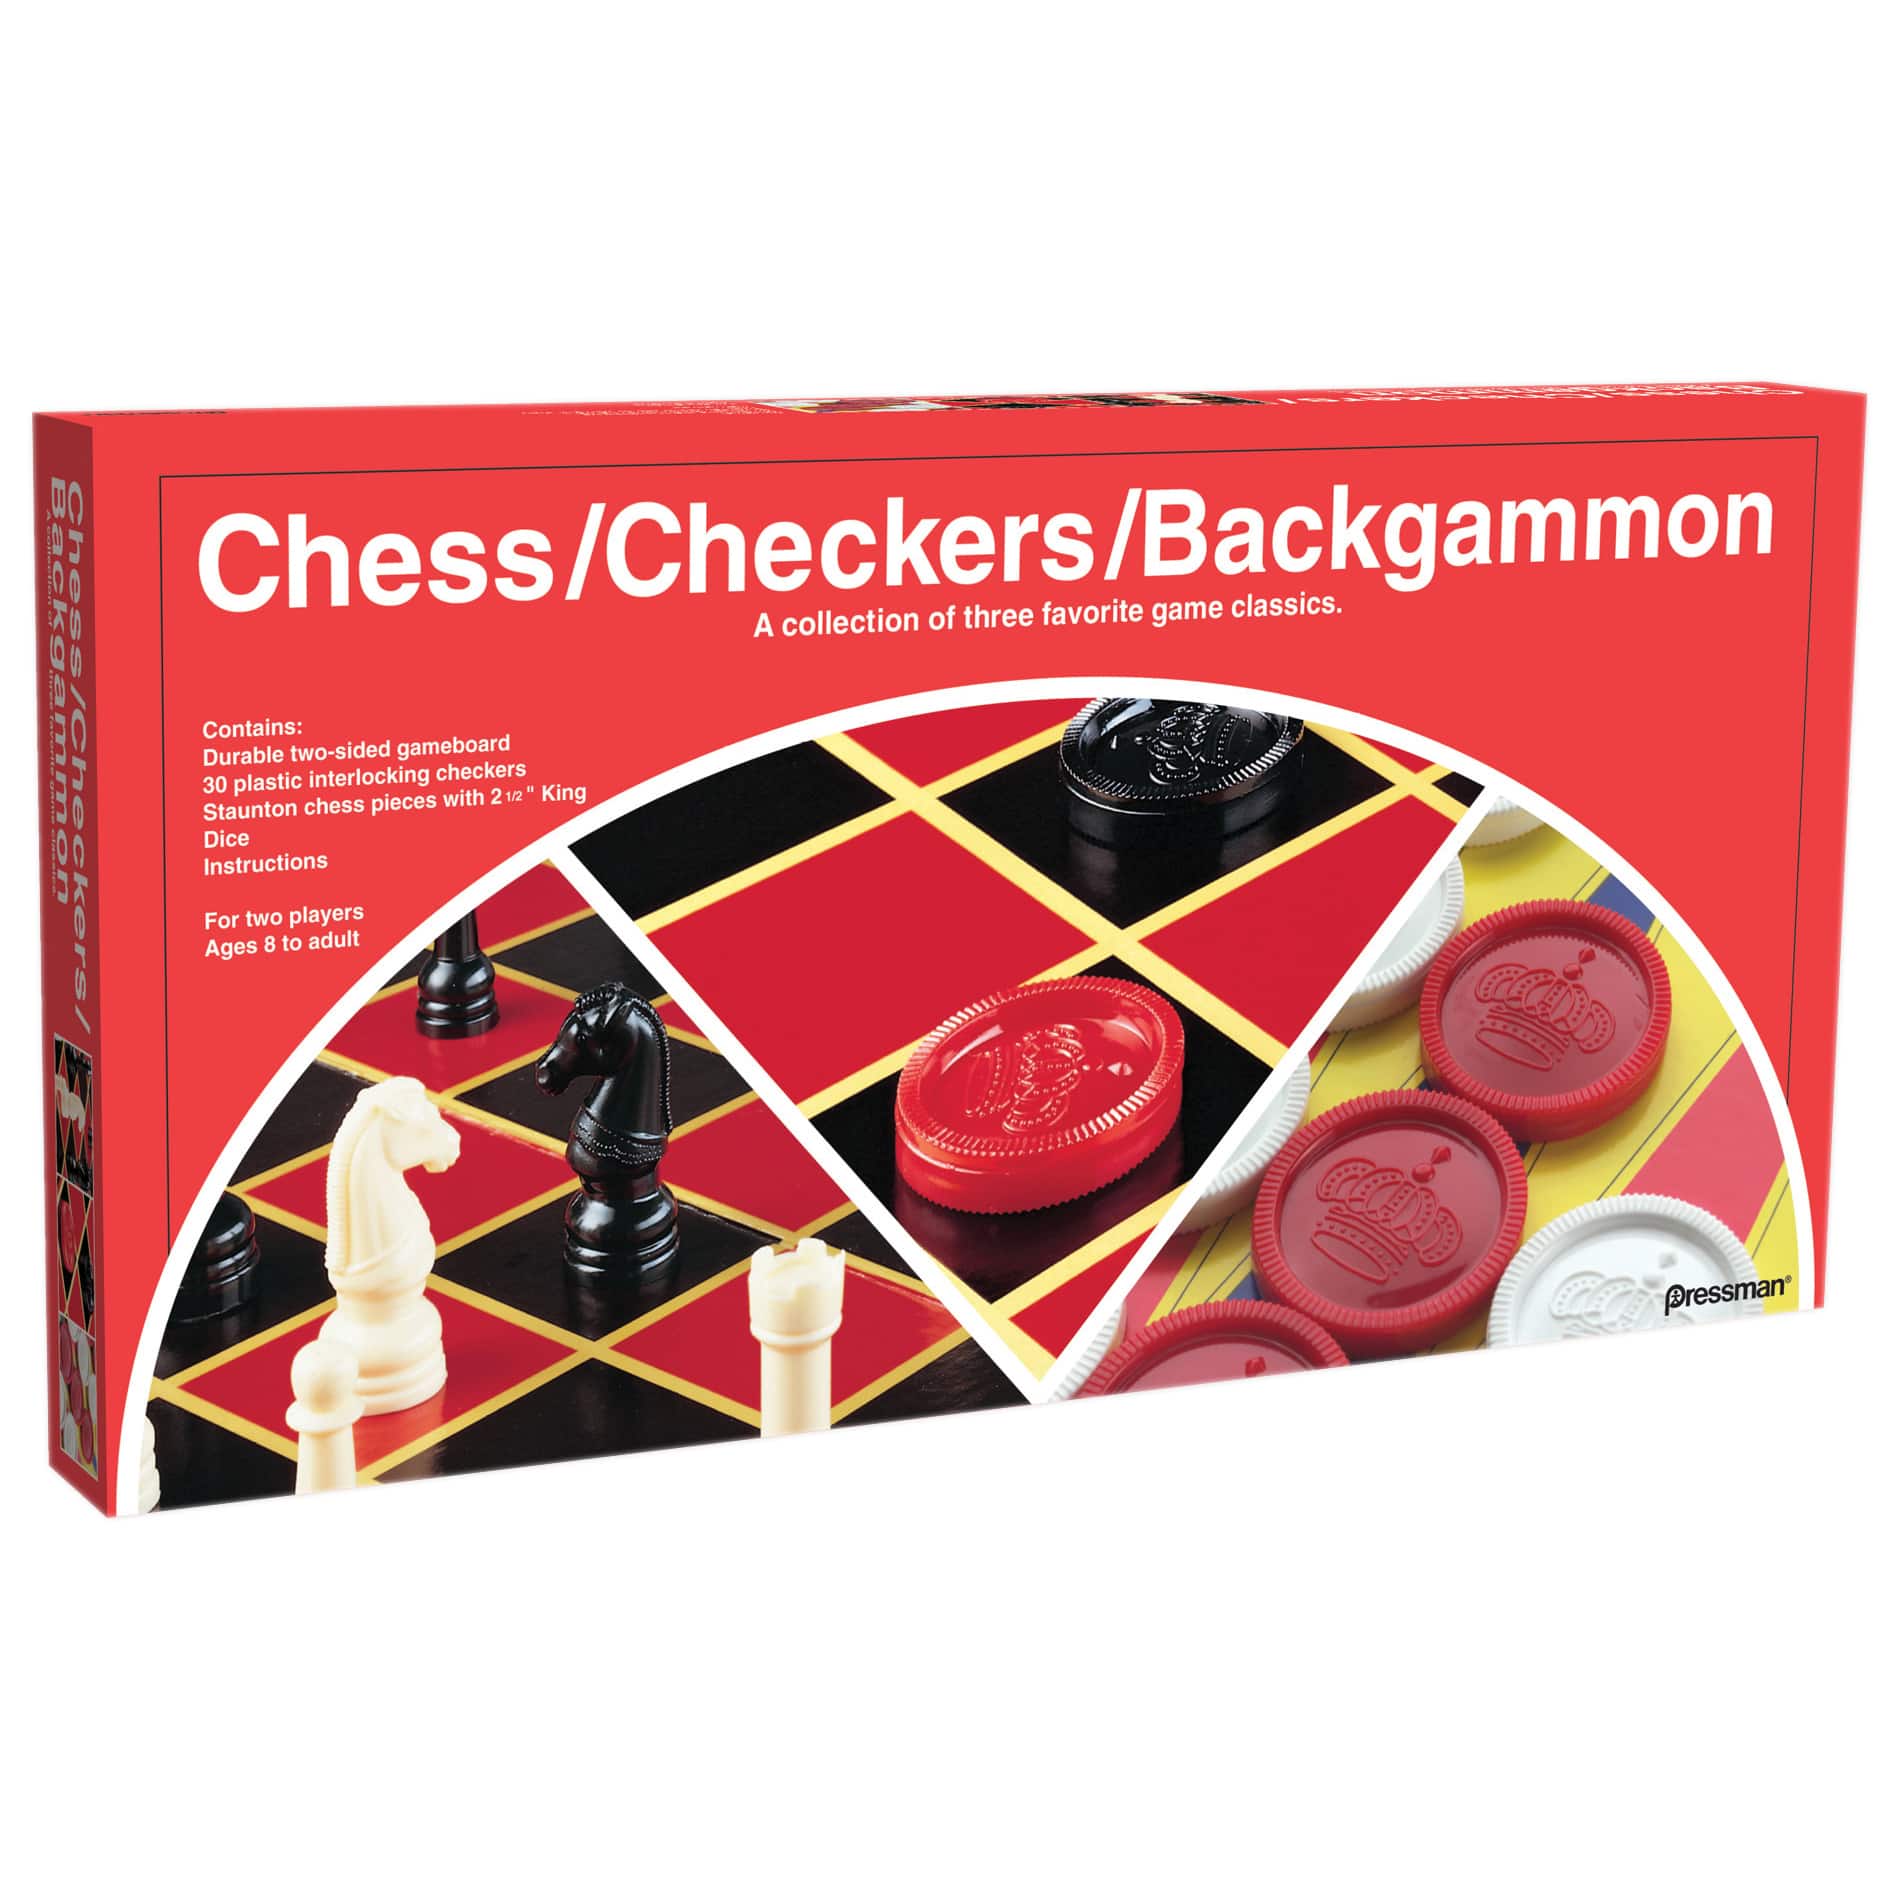 Backgammon Board & Chess SetHandmade in LebanonWood Inlaid Checkers Pieces